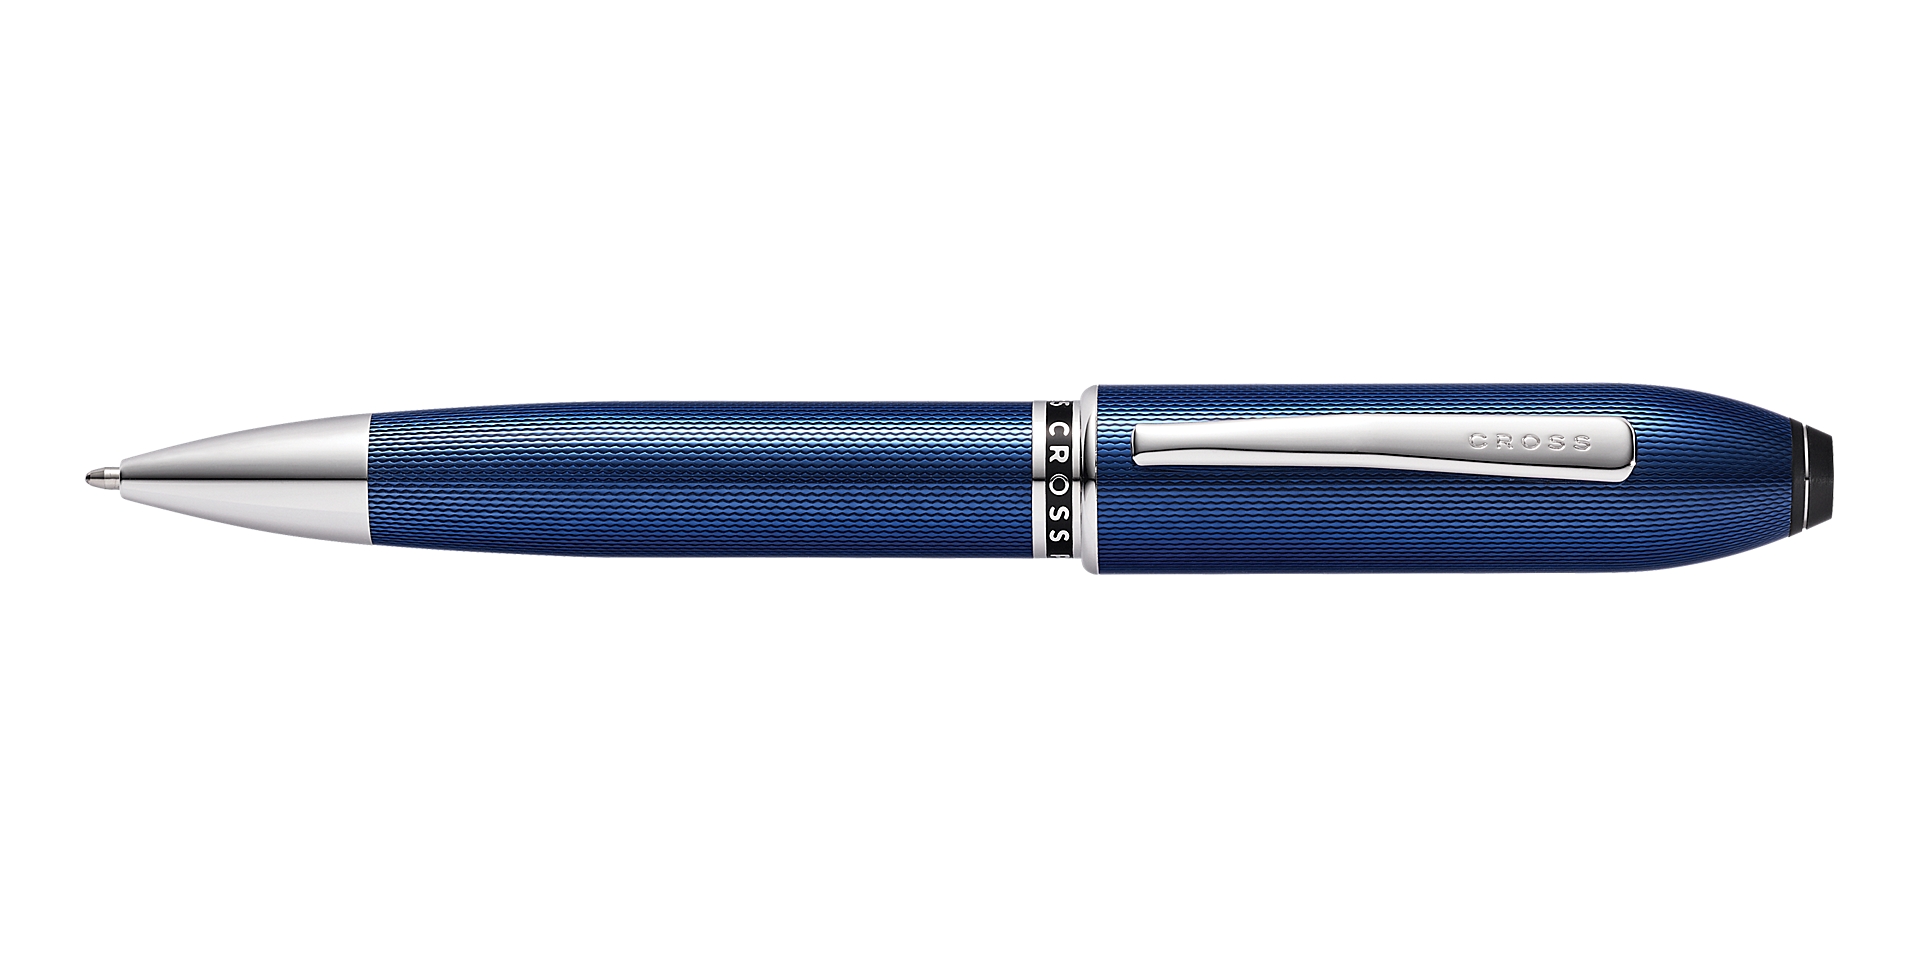 Cross Peerless TrackR Quartz Blue Ballpoint Pen with Chrome Appointments Picture